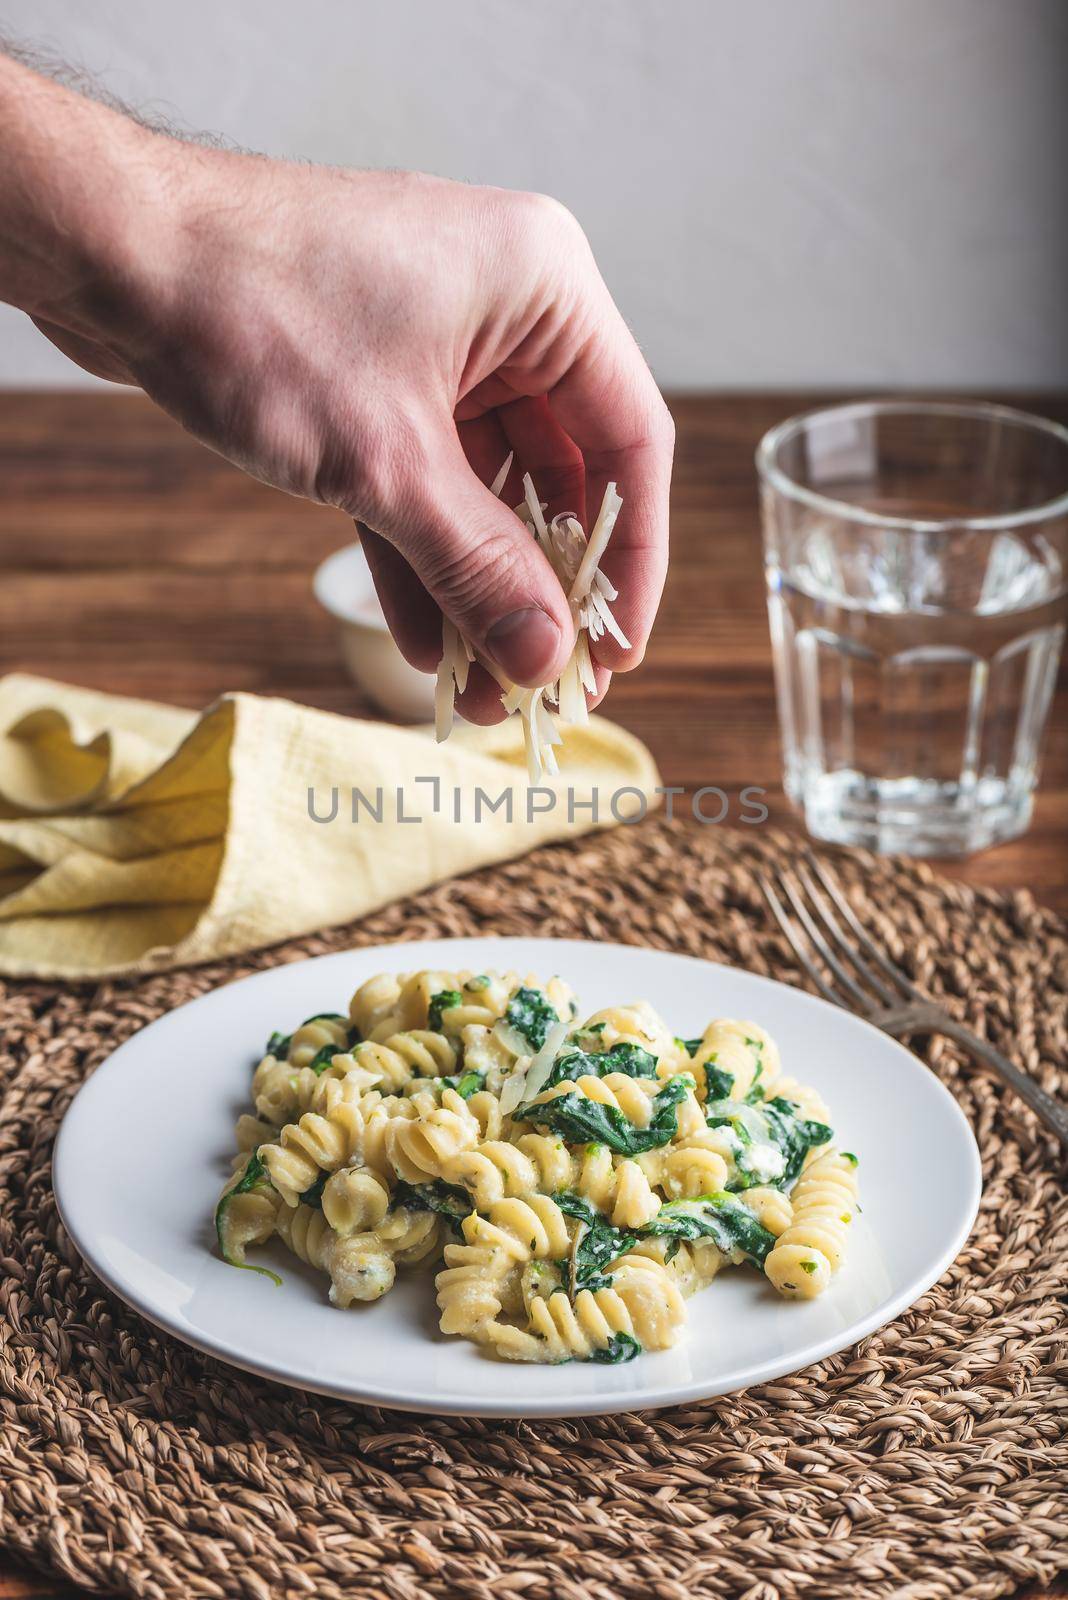 Fusilli Pasta with Spinach and Ricotta Garnished with Grated Parmesan Cheese on White Plate